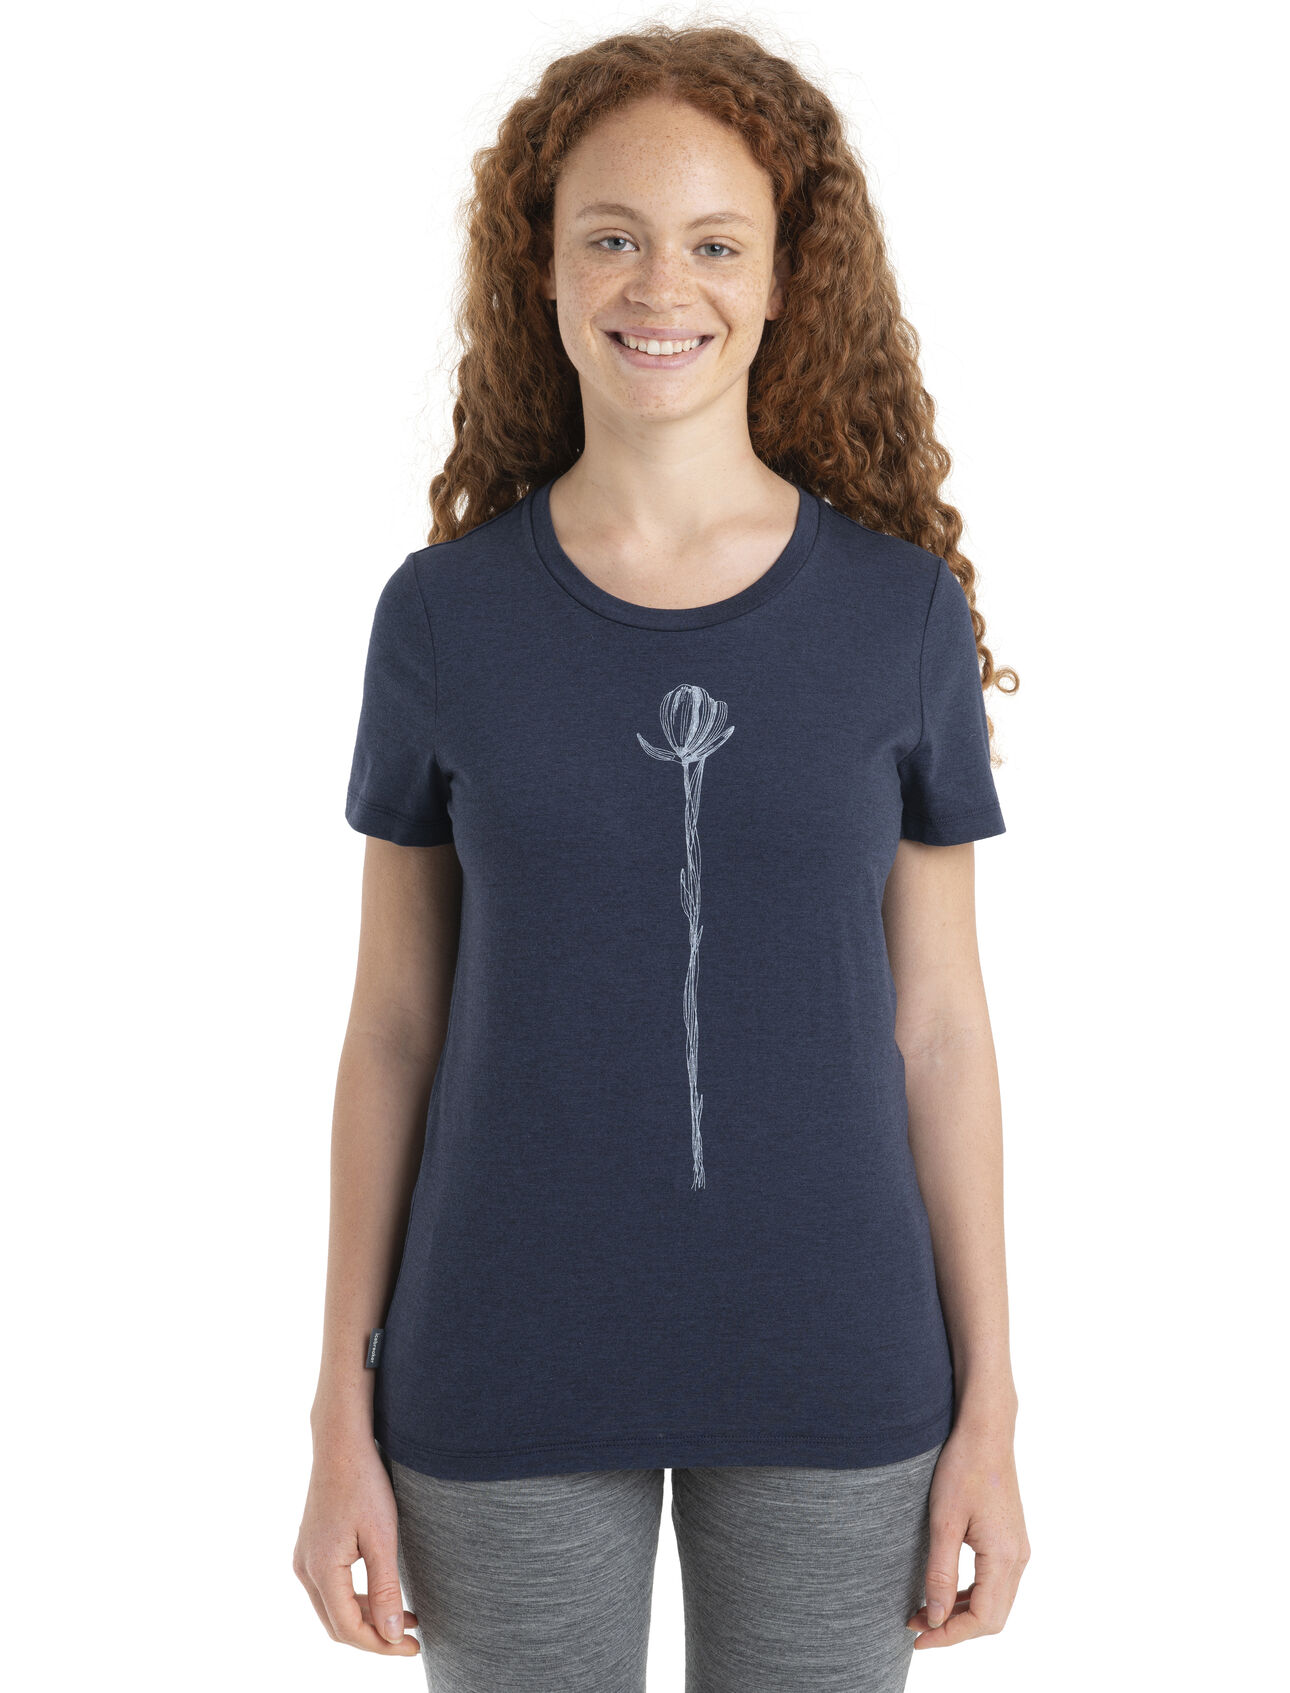 Womens Merino Central Classic Short Sleeve T-Shirt Solo Central to your wardrobe and as classic as they come, the Central Classic Short Sleeve Tee Solo is a go-to tee featuring a soft jersey blend of merino wool and organic cotton. The original artwork features a solitary flower from root to bloom. 